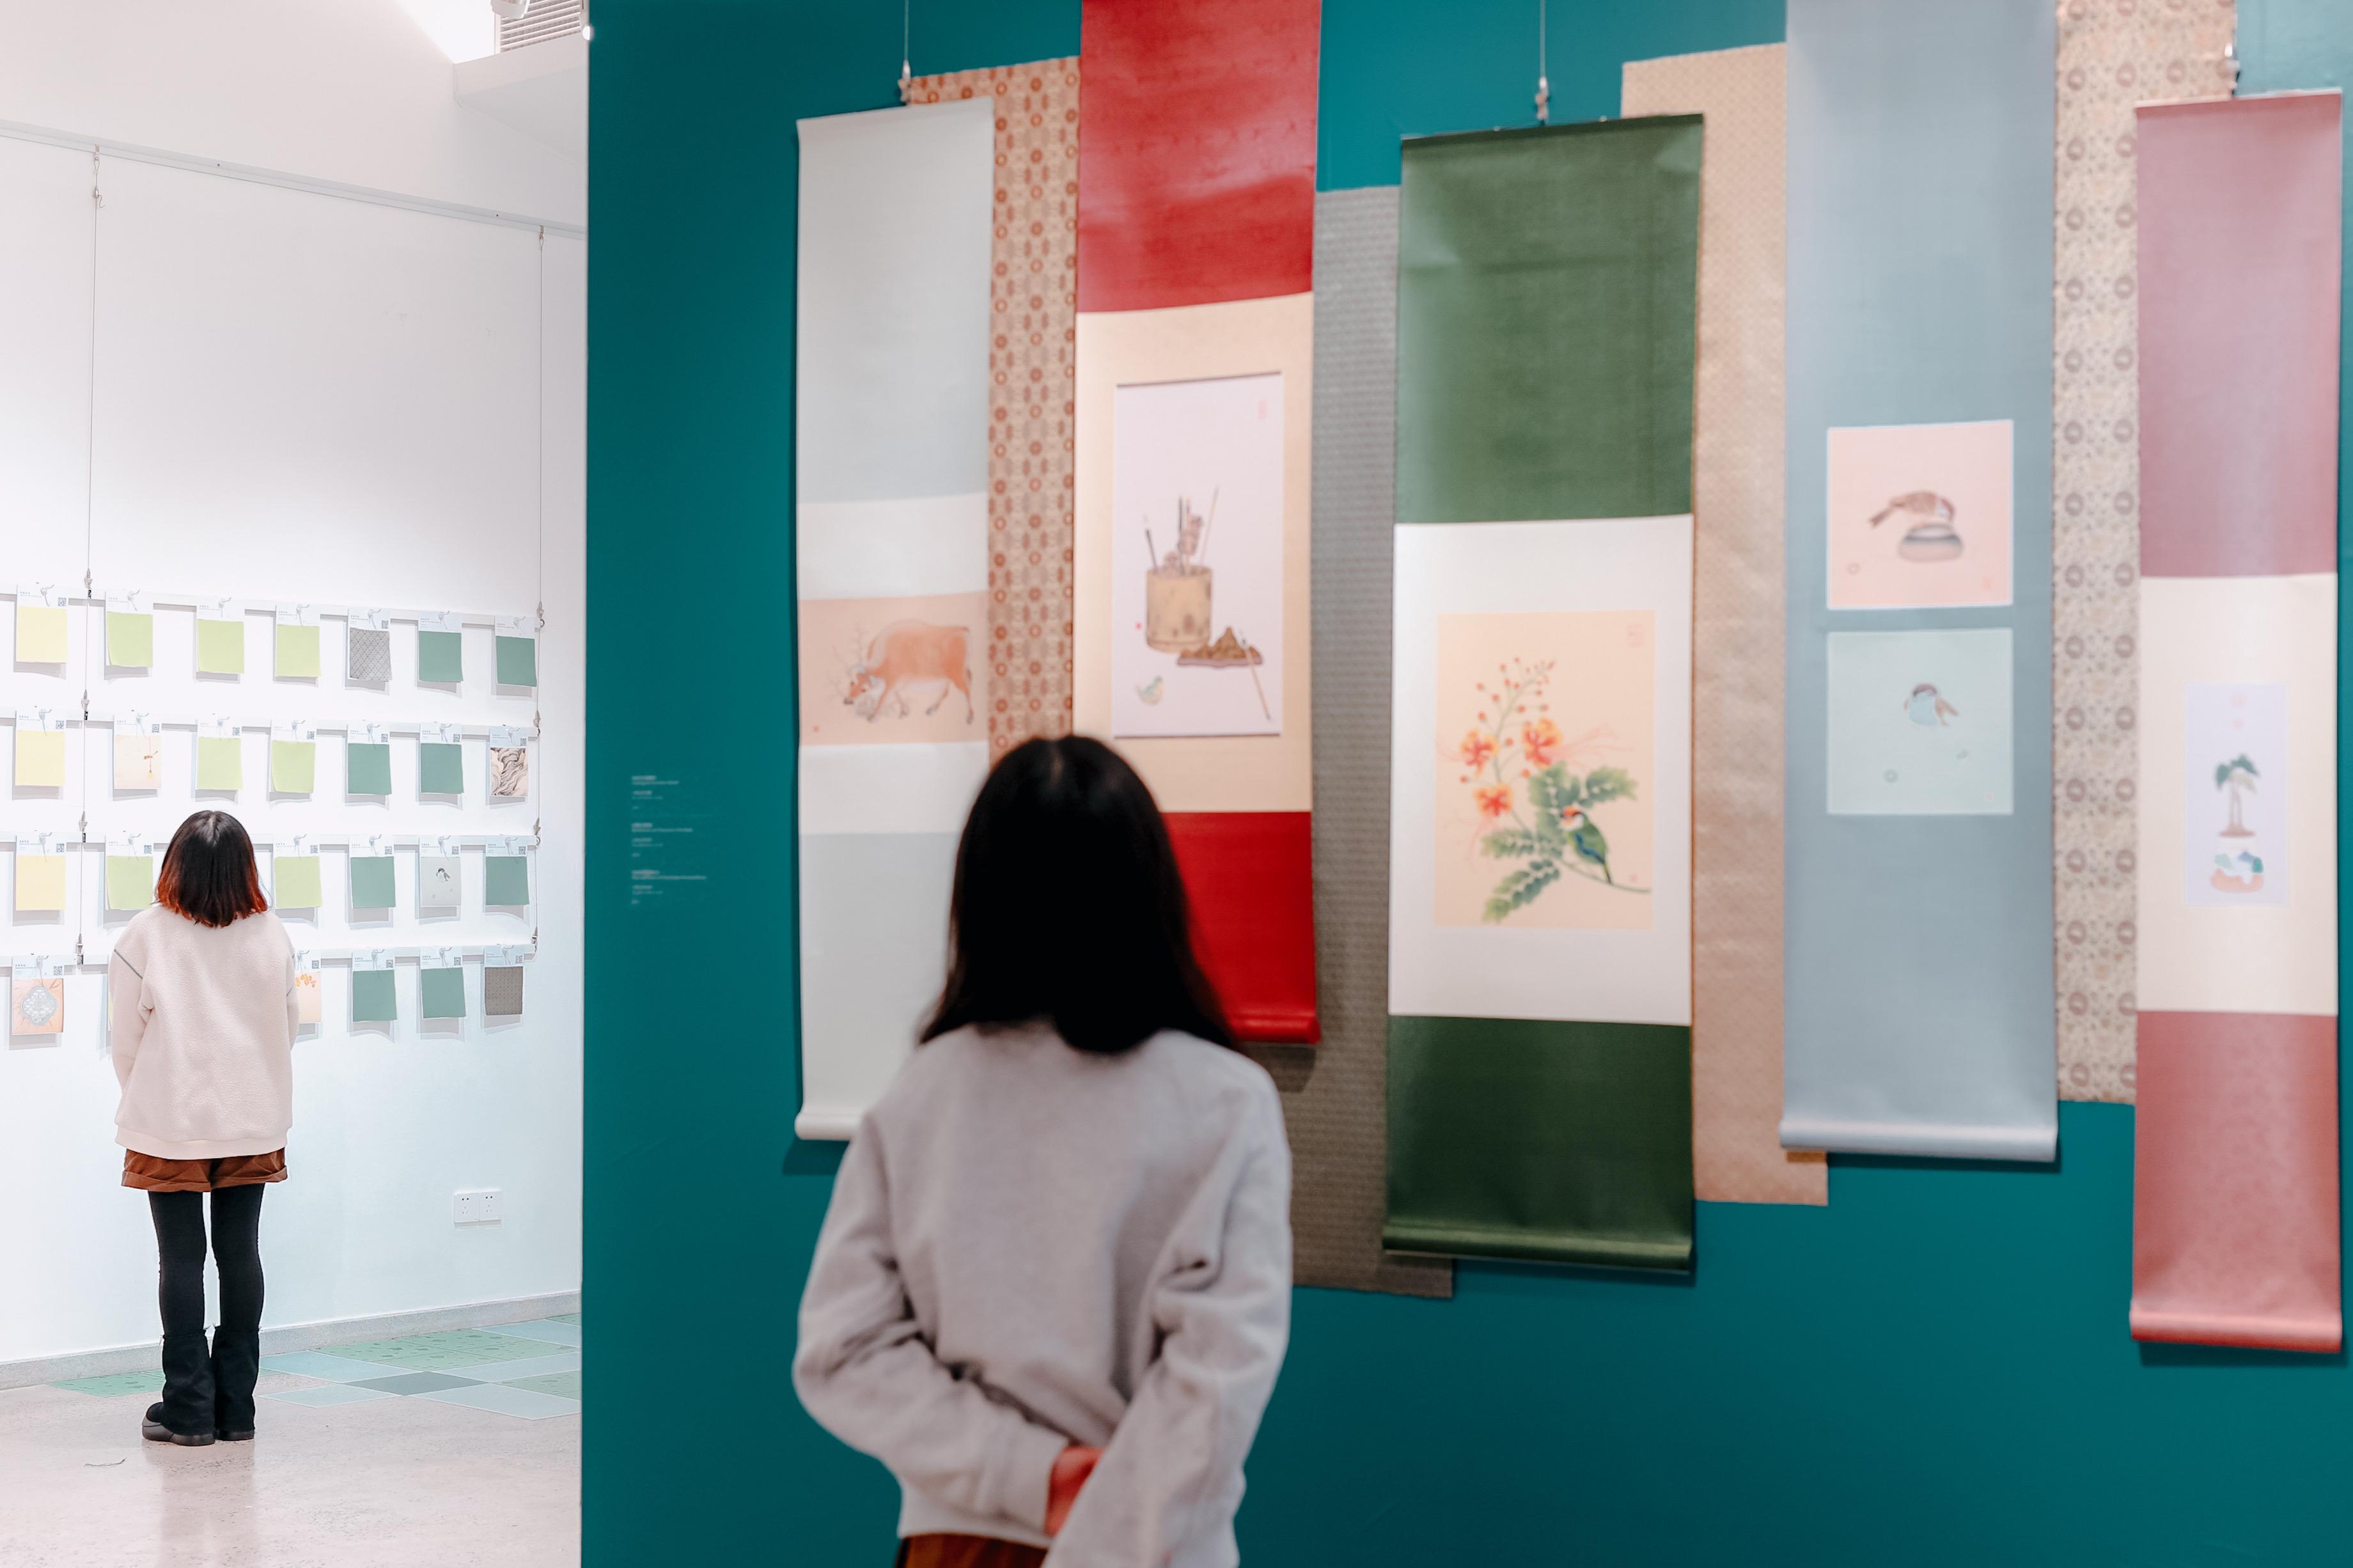 Co-organised by the Art Promotion Office and the Hong Kong Designers Association, the third exhibition of the second round of the "Art >< Creativity" exhibition series in the Greater Bay Area, "Traversing Past and Present", is open until February 12 next year at Tio Gallery in Zhongshan.